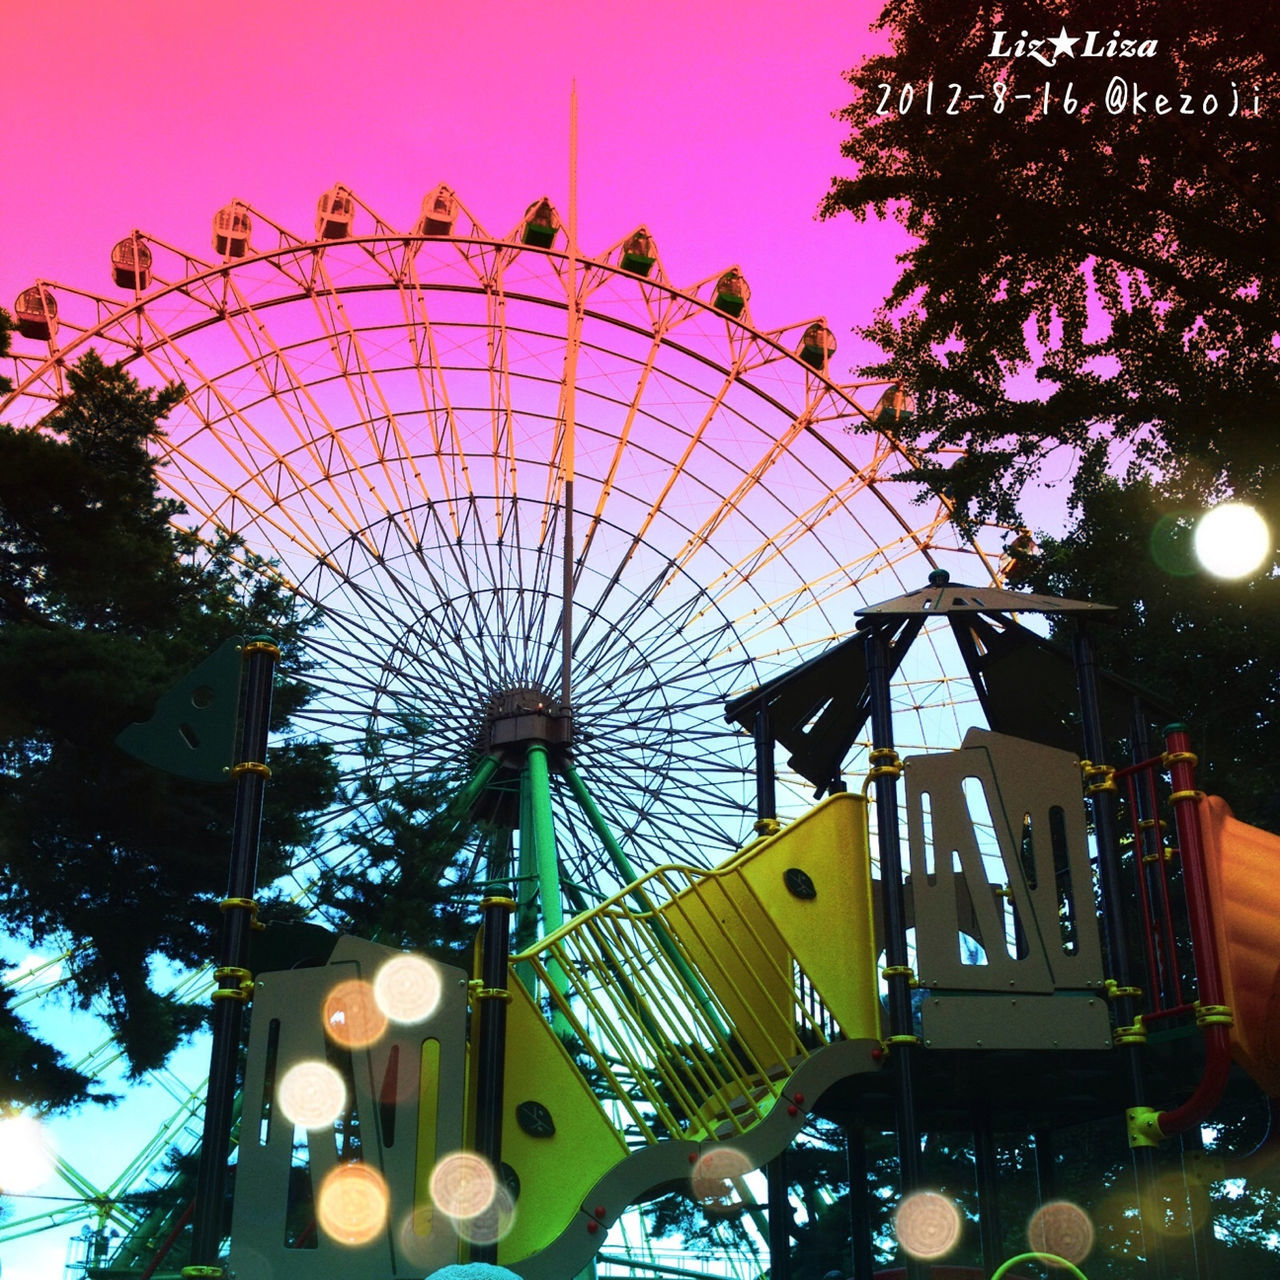 low angle view, illuminated, built structure, lighting equipment, architecture, sky, amusement park, arts culture and entertainment, ferris wheel, amusement park ride, decoration, tree, building exterior, night, multi colored, ceiling, hanging, clear sky, no people, outdoors